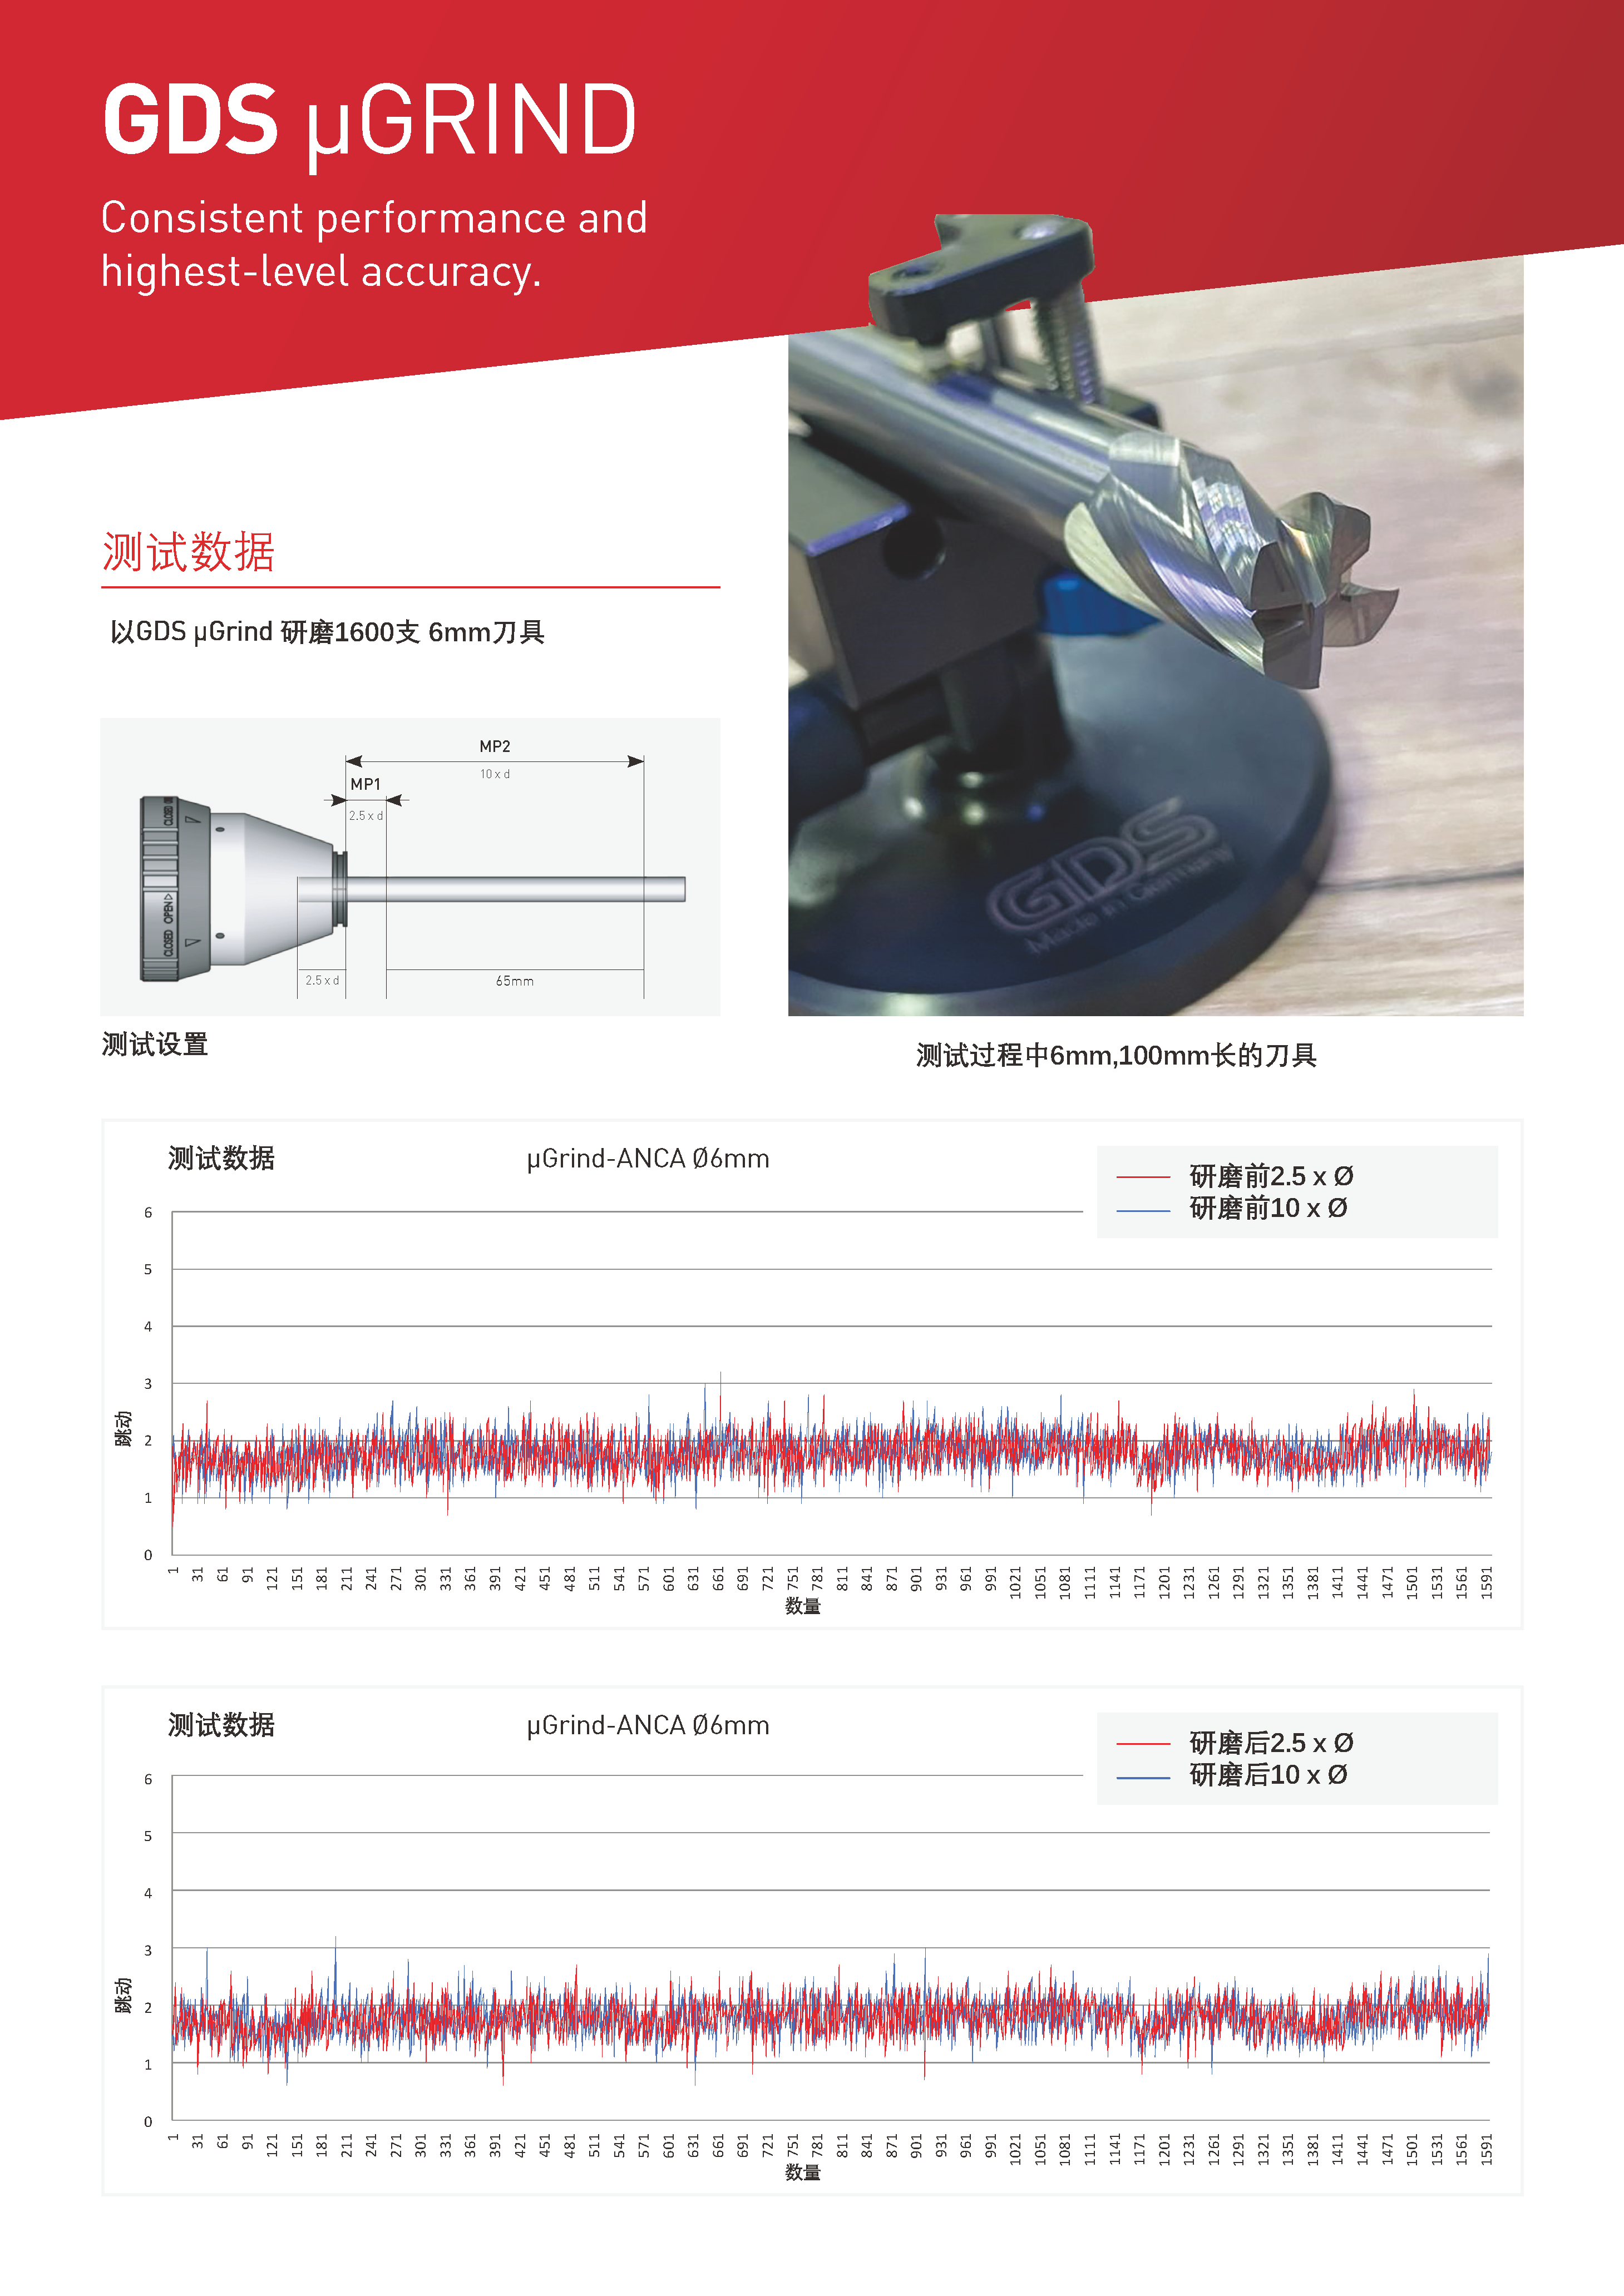 ANCA_GDS_Flyer 中文_页面_4.png